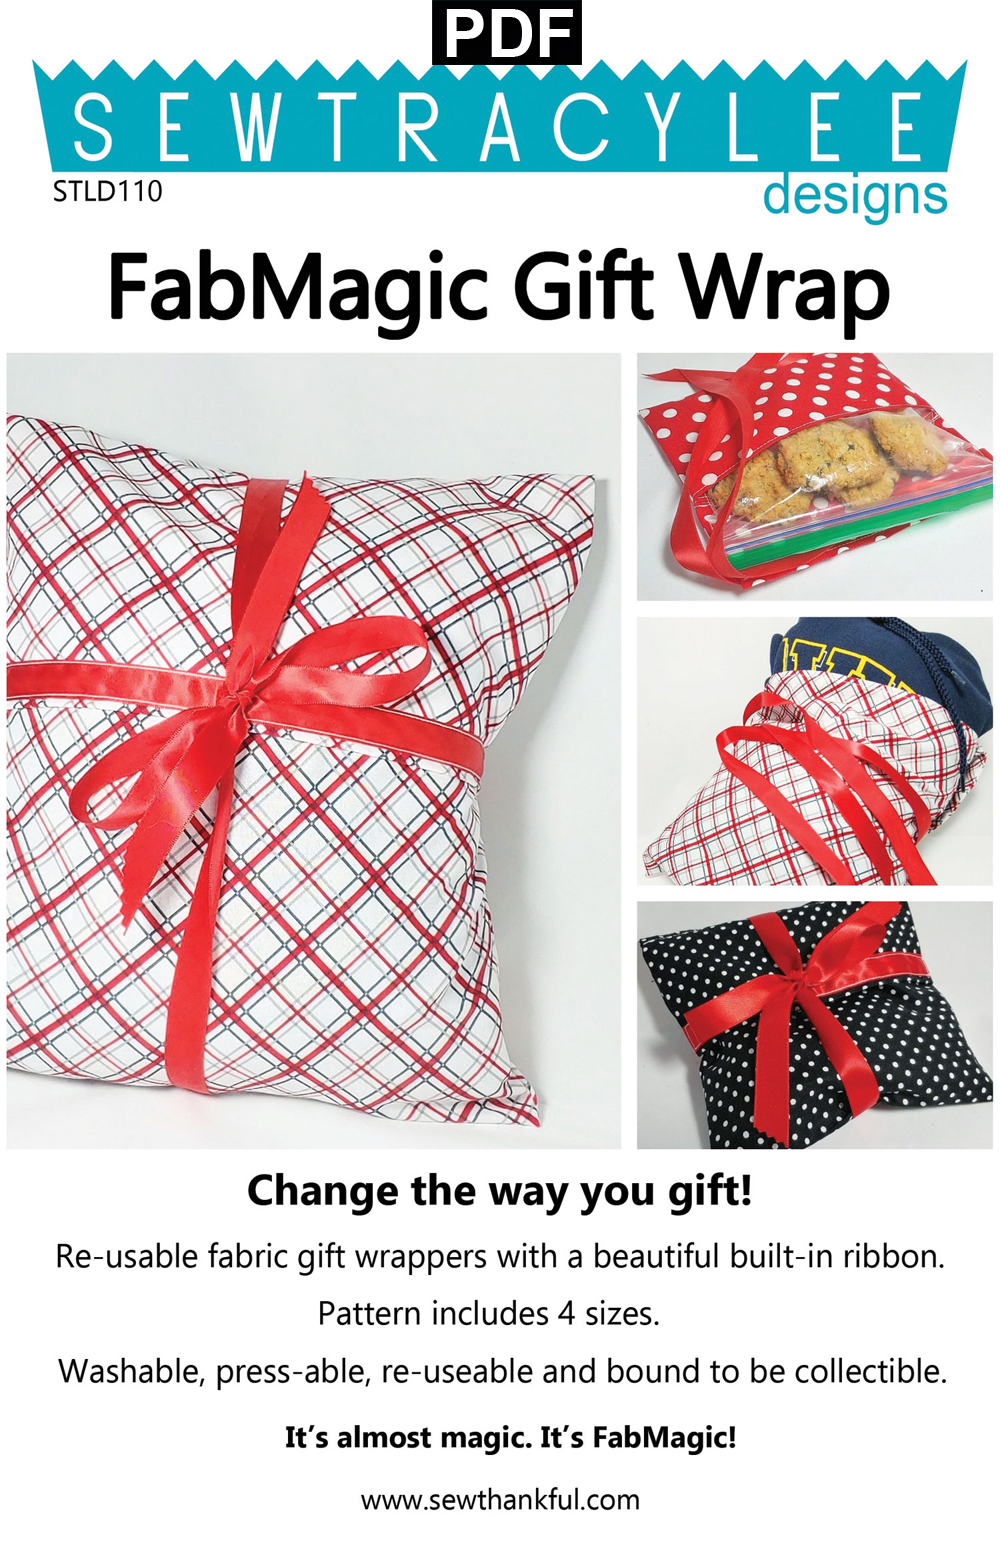 Fab-Magic-Gift-Wrap-sewing-pattern-SewTracy-Lee-Designs-front